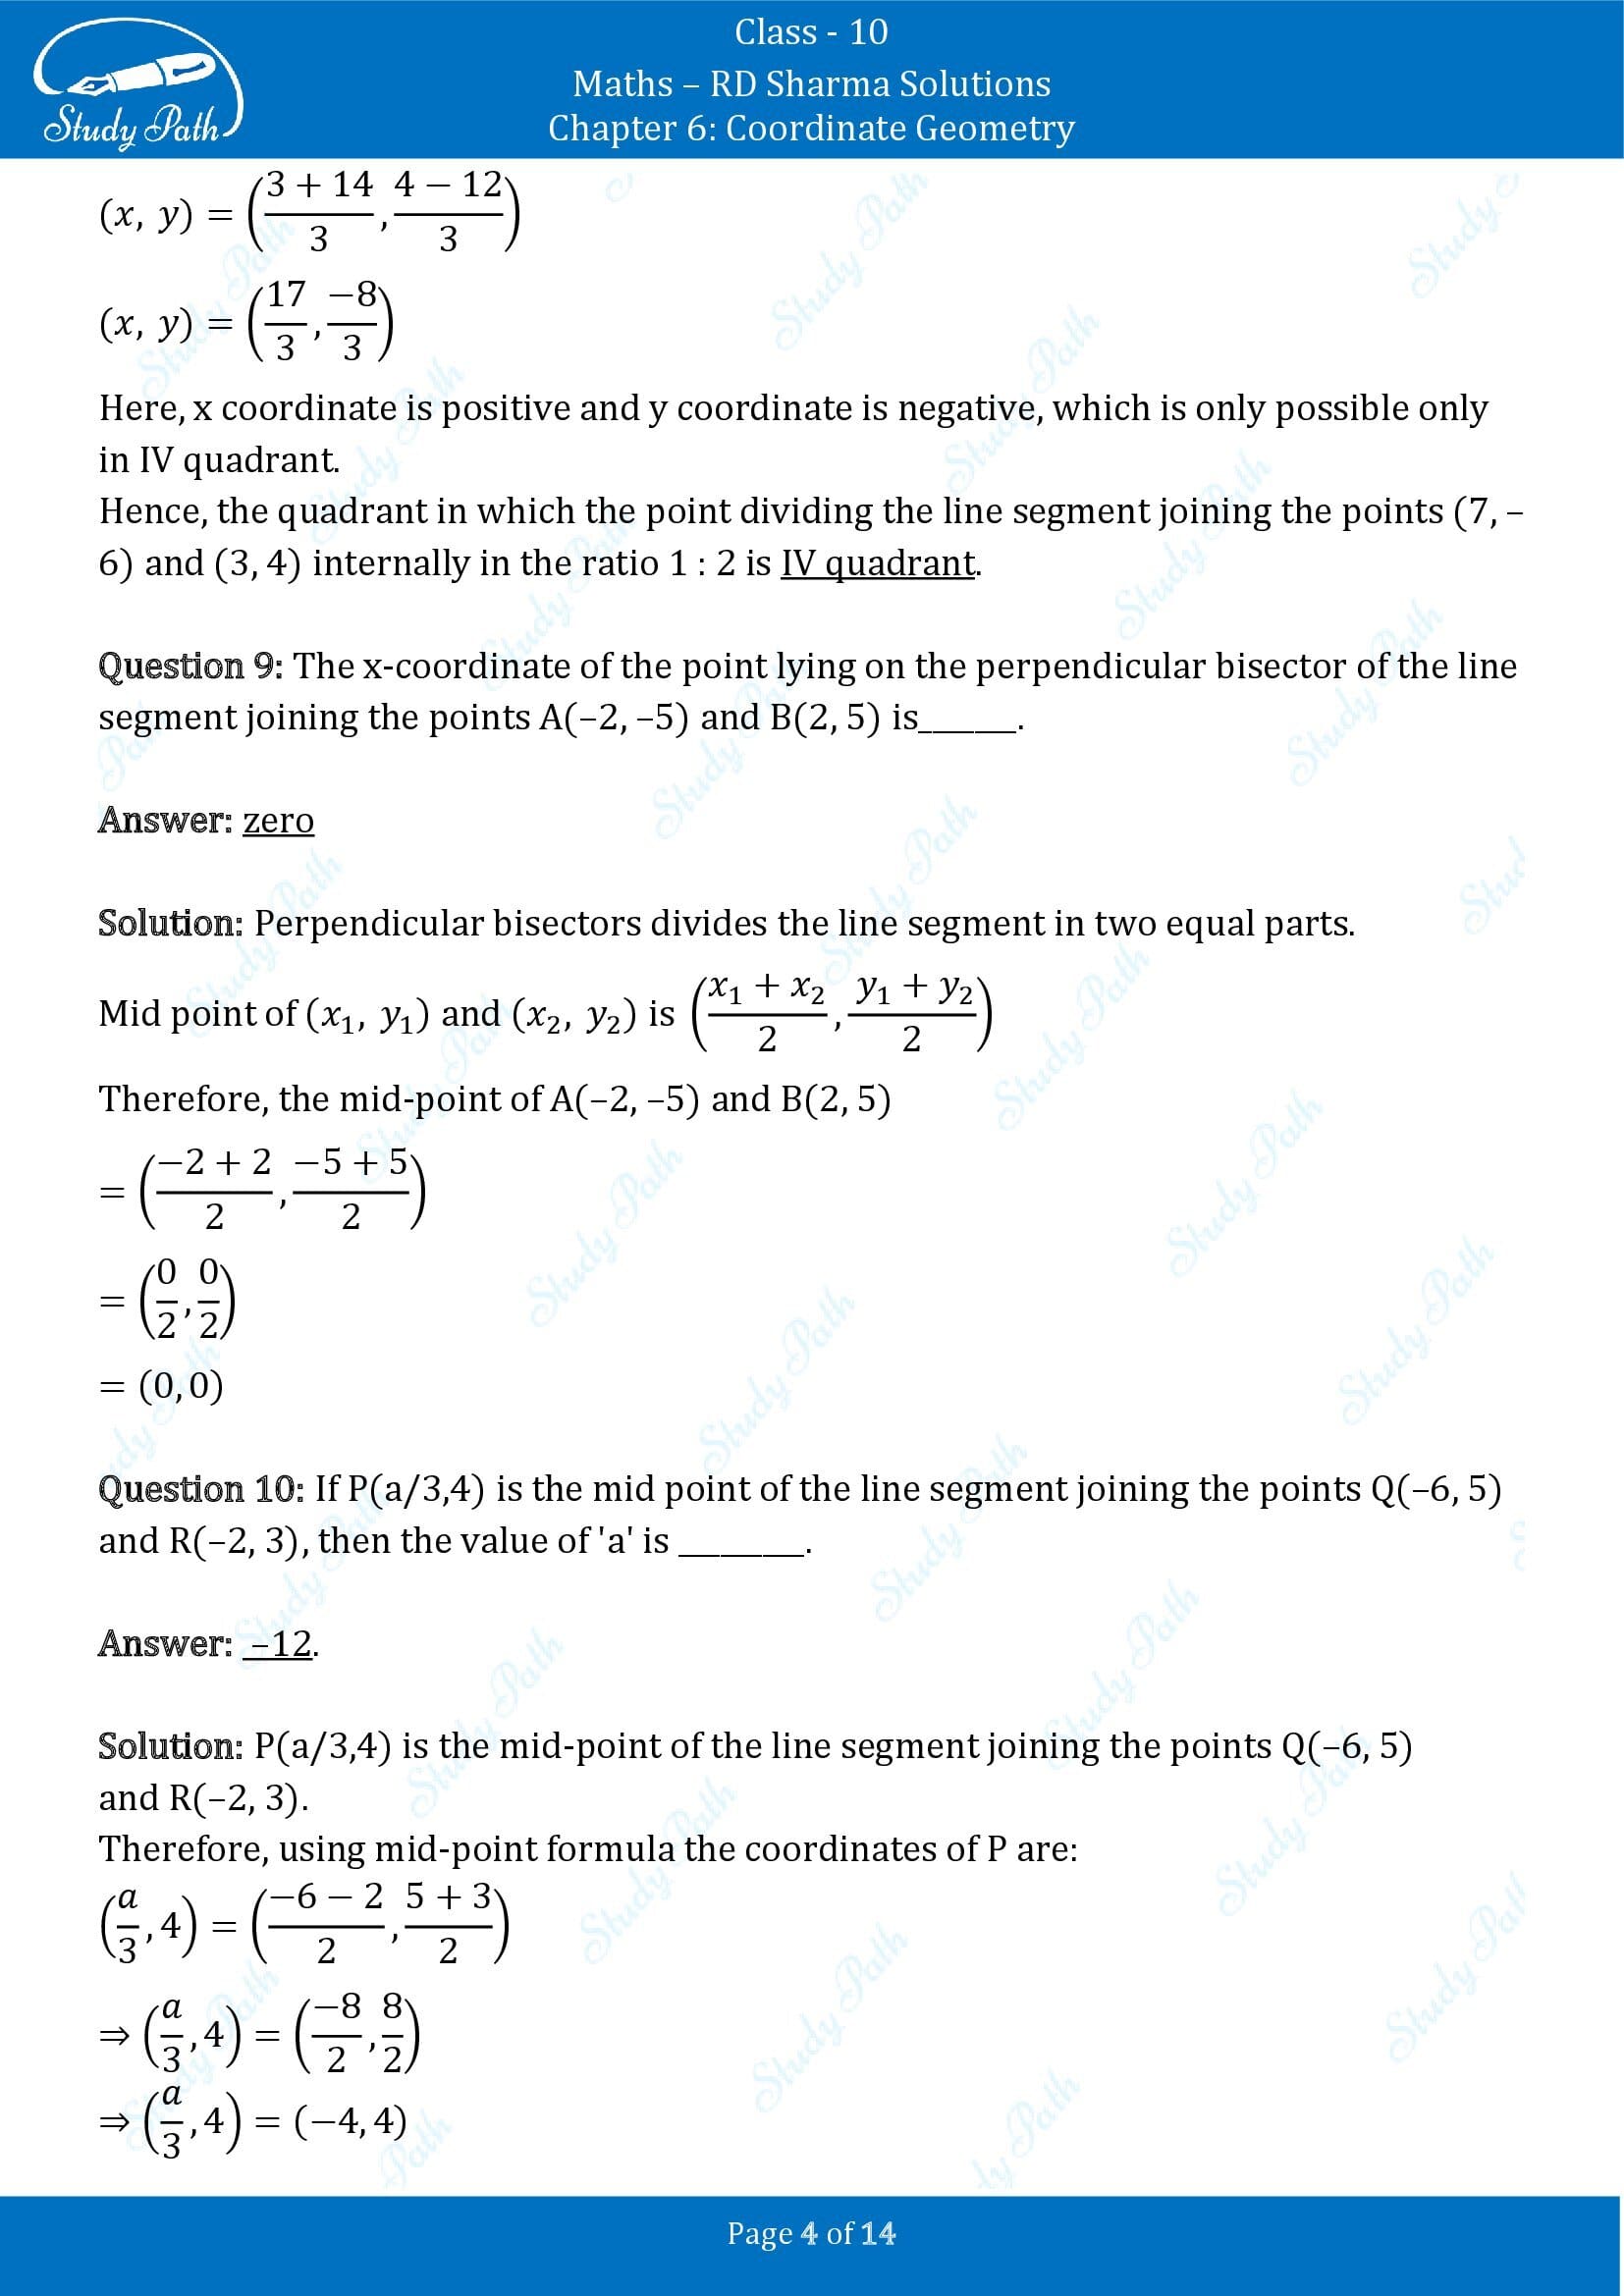 RD Sharma Solutions Class 10 Chapter 6 Coordinate Geometry Fill in the Blank Type Questions FBQs 00004